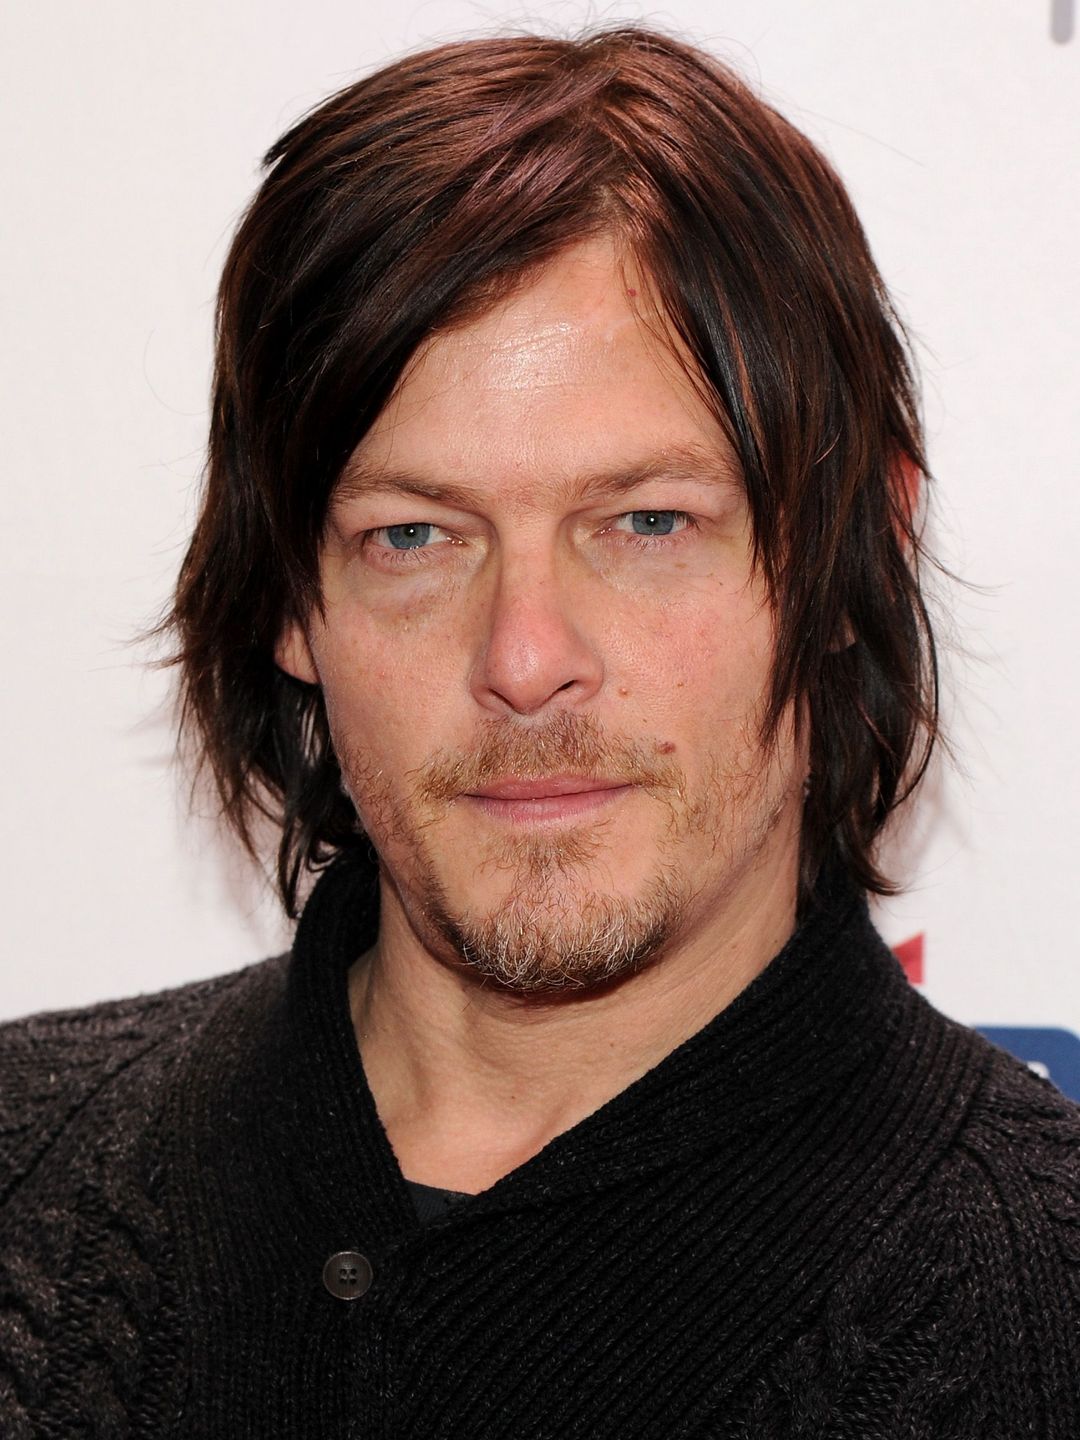 Norman Reedus does he have kids